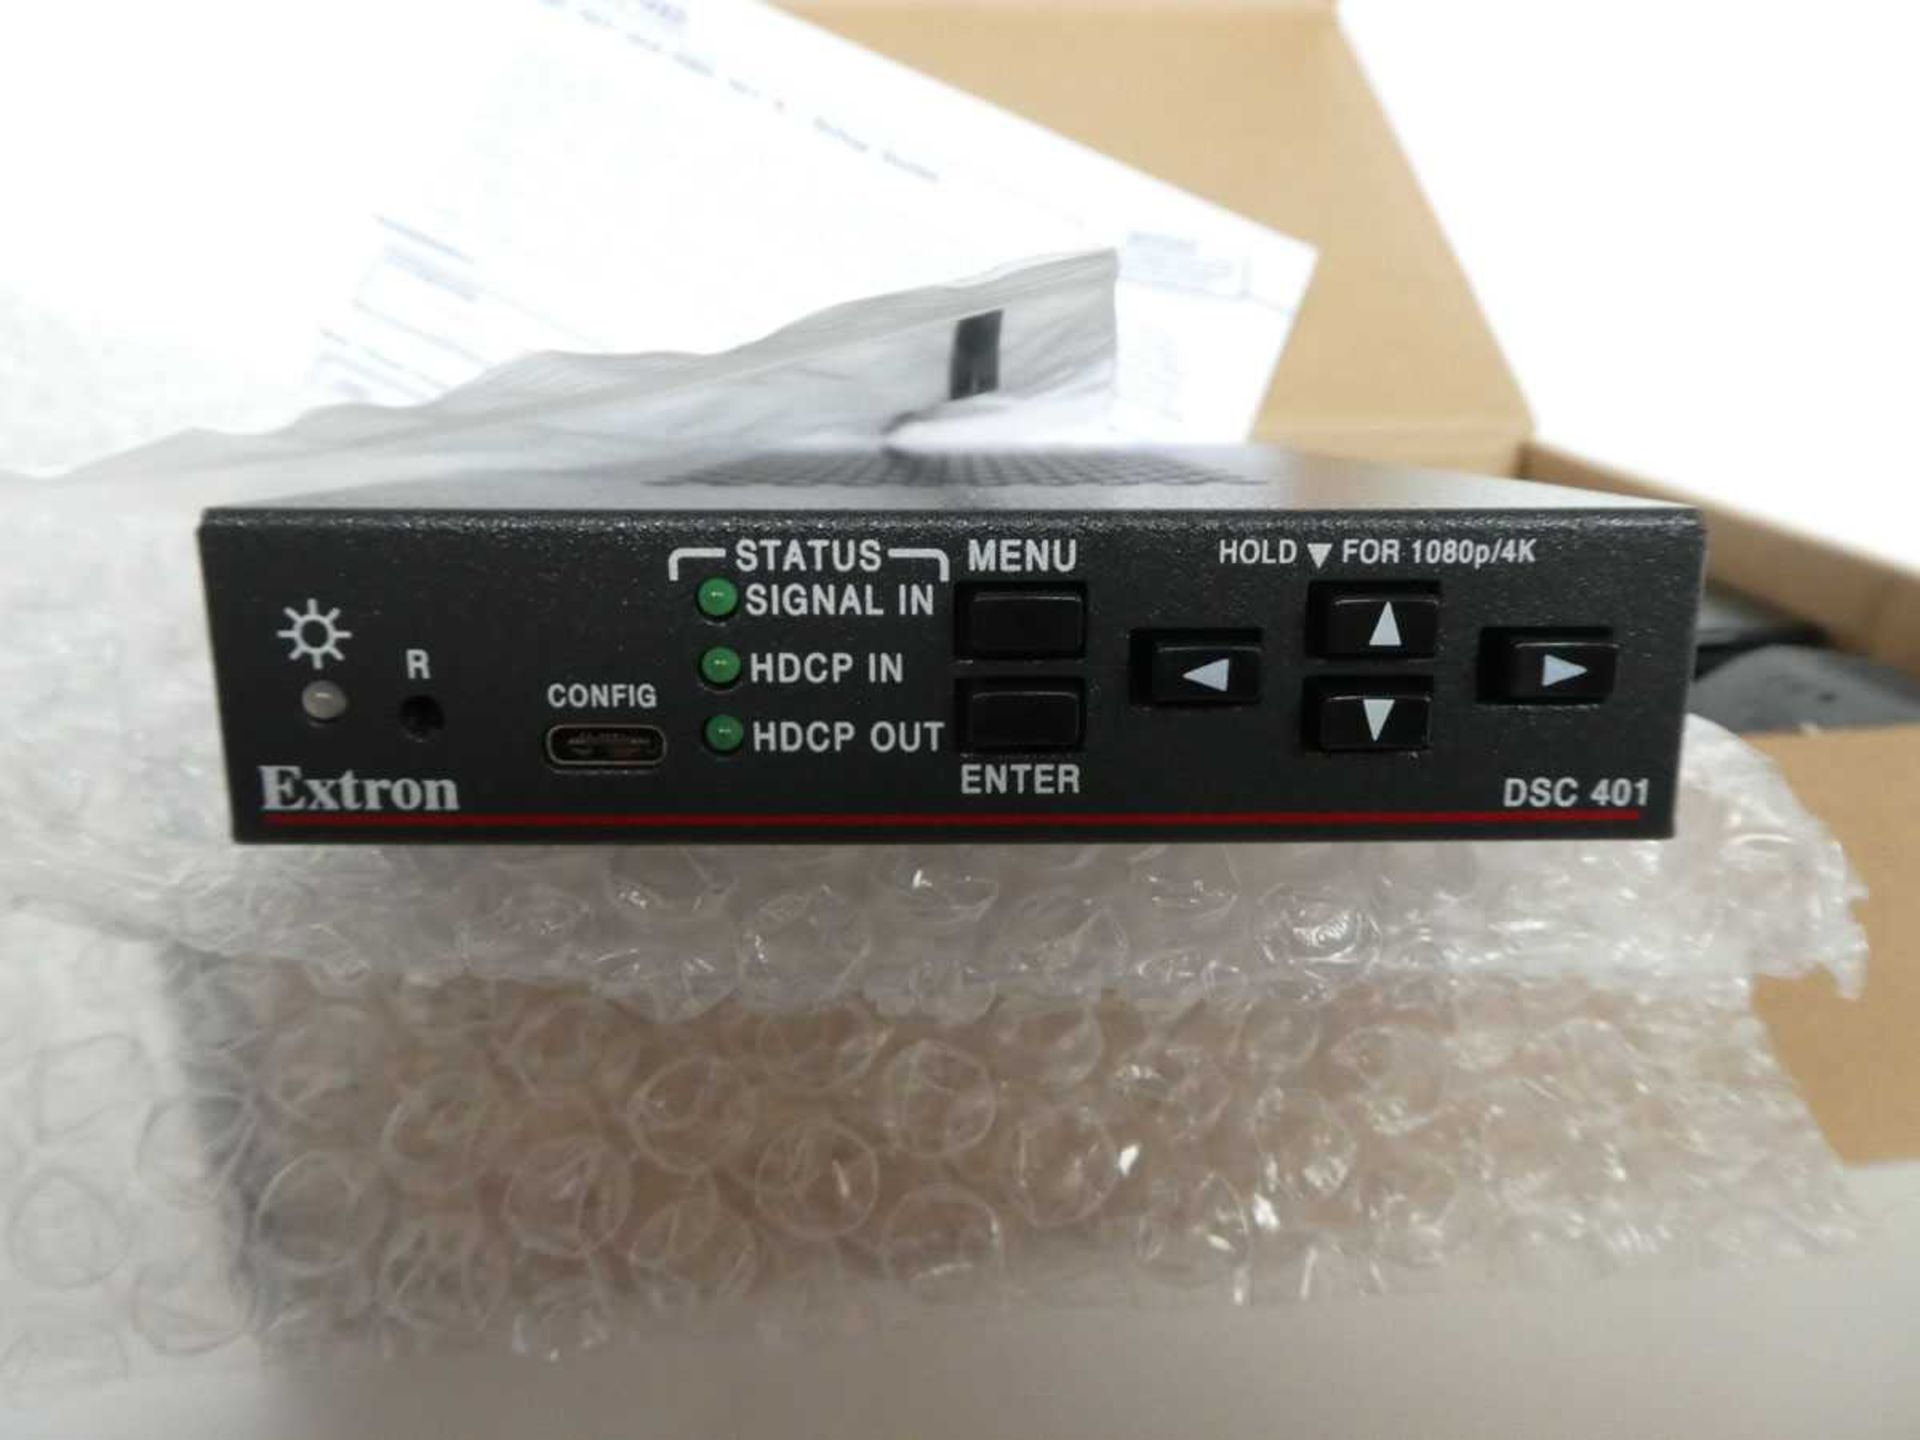 +VAT Extron DSC 401 HDMI to HDMI scaler in box with power supply - Image 2 of 2